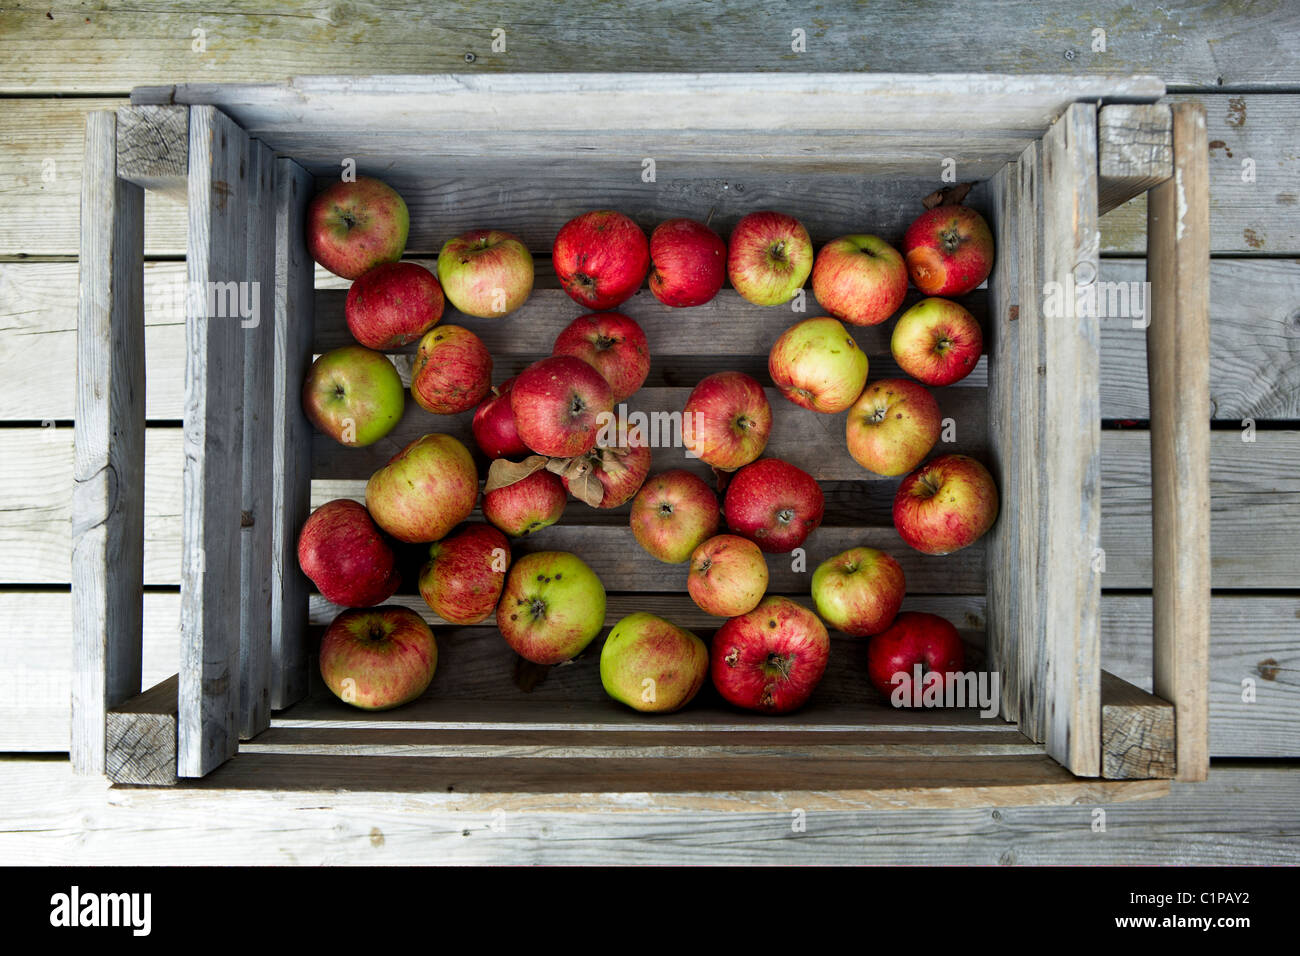 https://c8.alamy.com/comp/C1PAY2/apples-in-wooden-box-C1PAY2.jpg